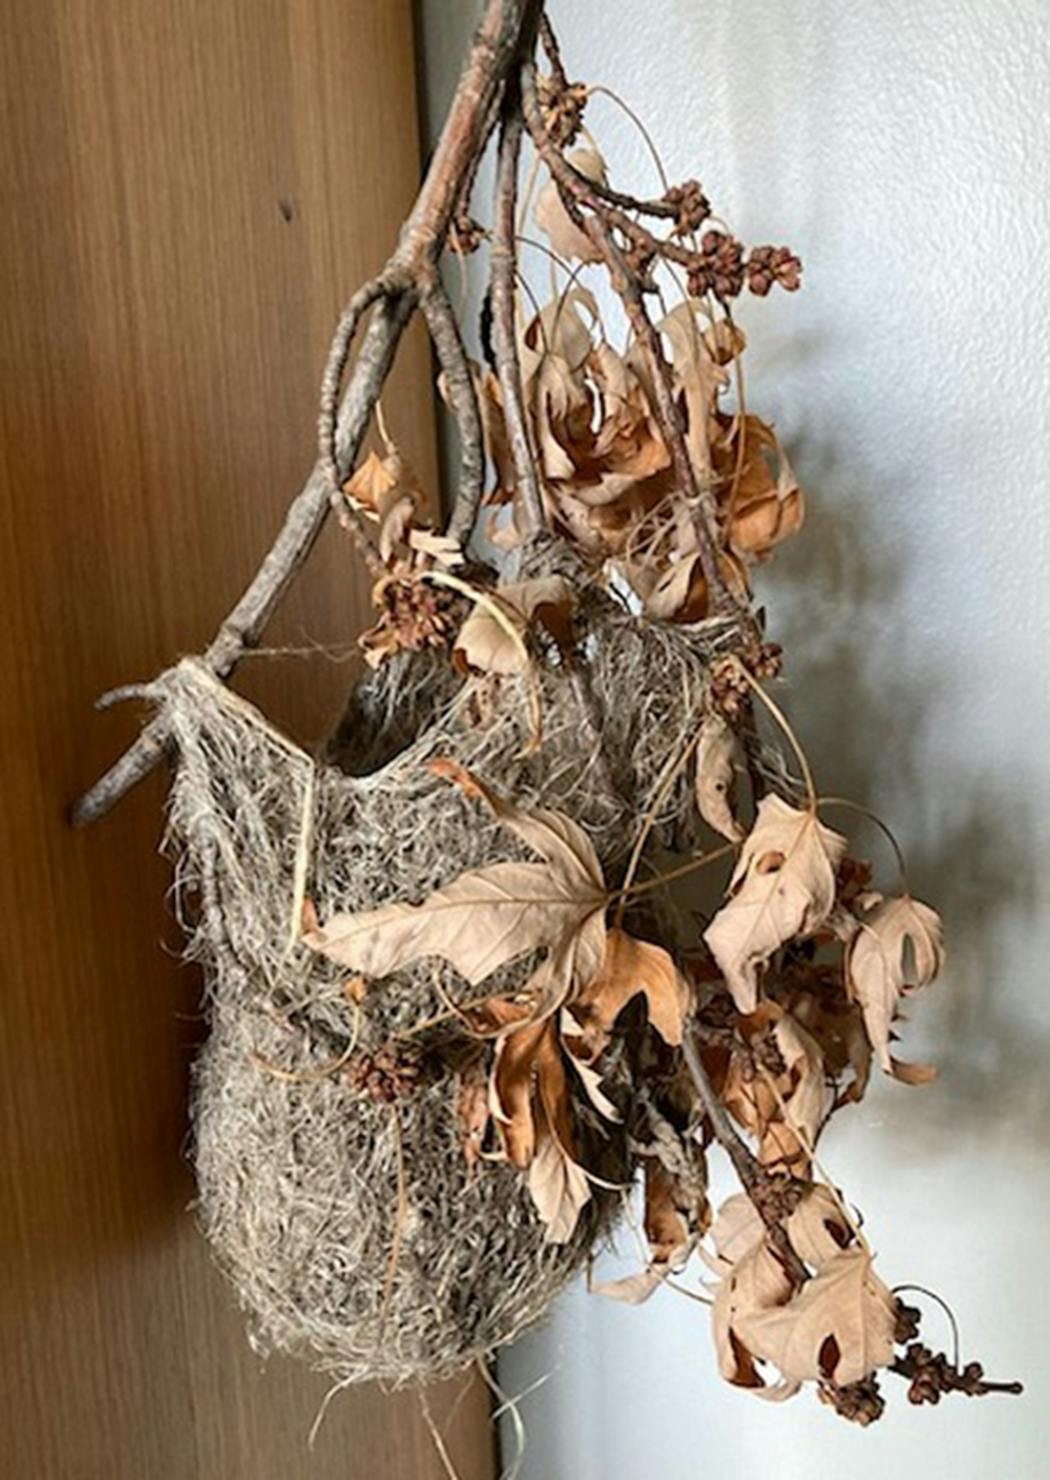 A Baltimore oriole nest made out of mostly horse hair.